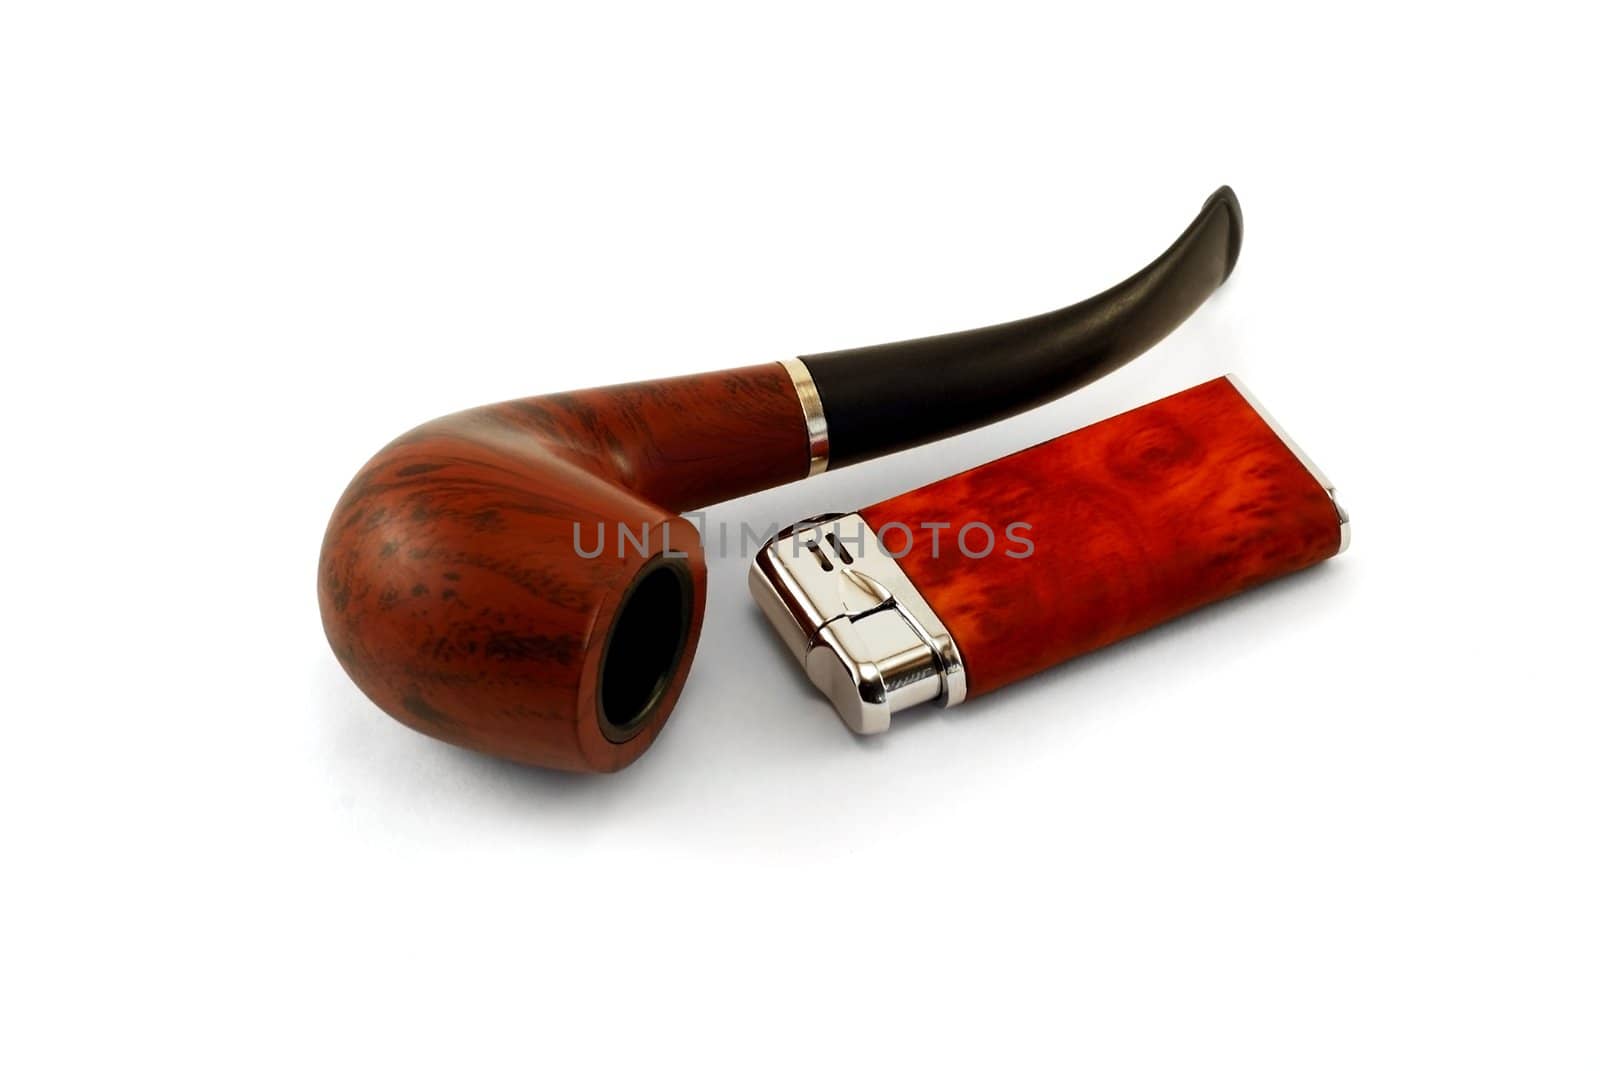 The tobacco-pipe and lighter are photographed close up on a white background